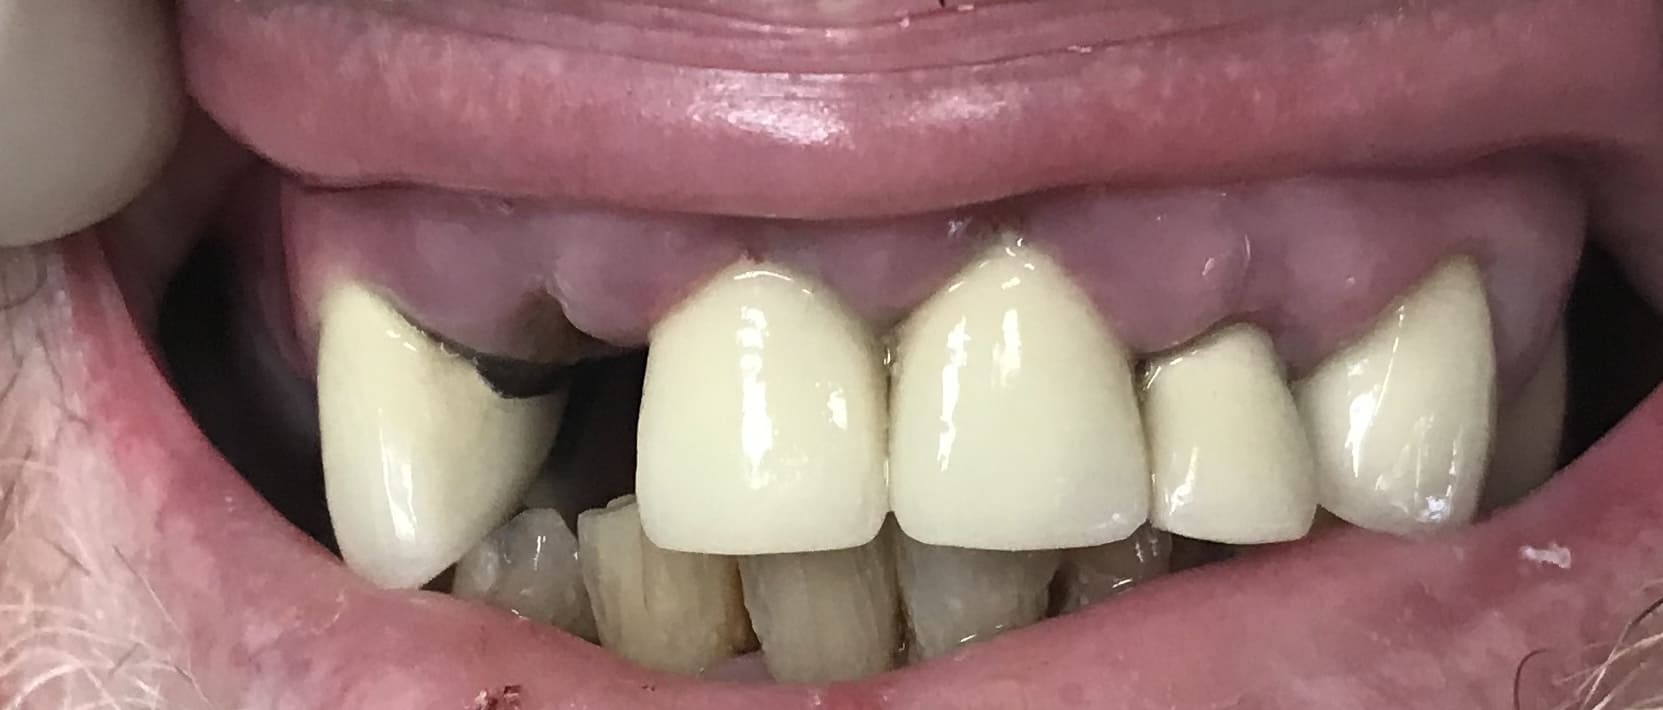 Close up of a mouth with some missing teeth